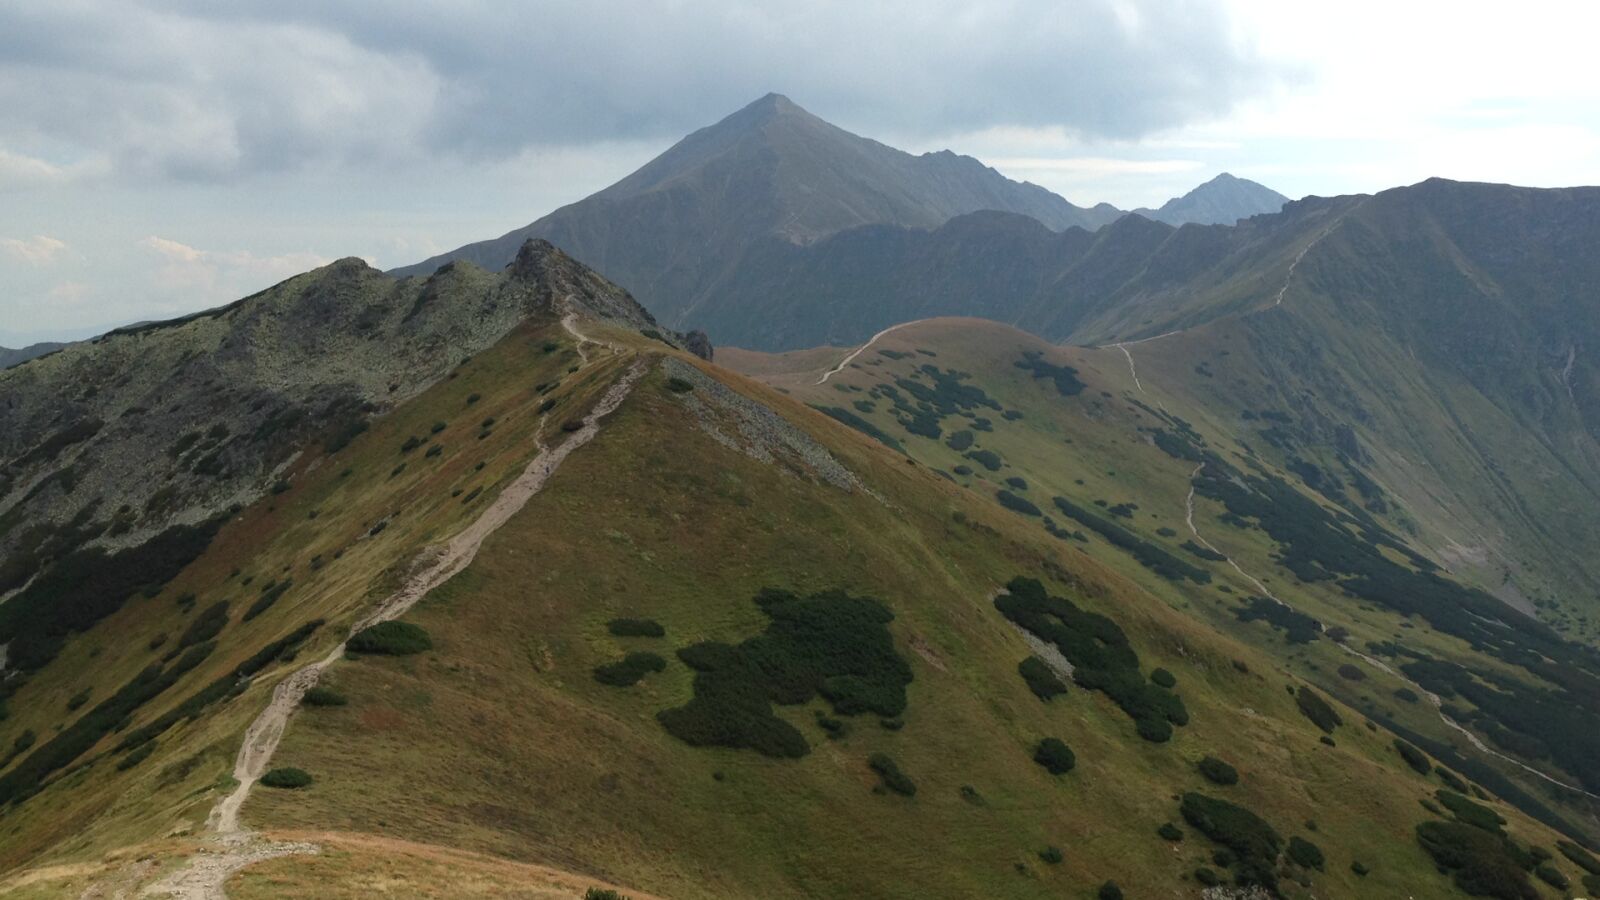 Apple iPhone 5c sample photo. Mountains, tatry, landscape photography